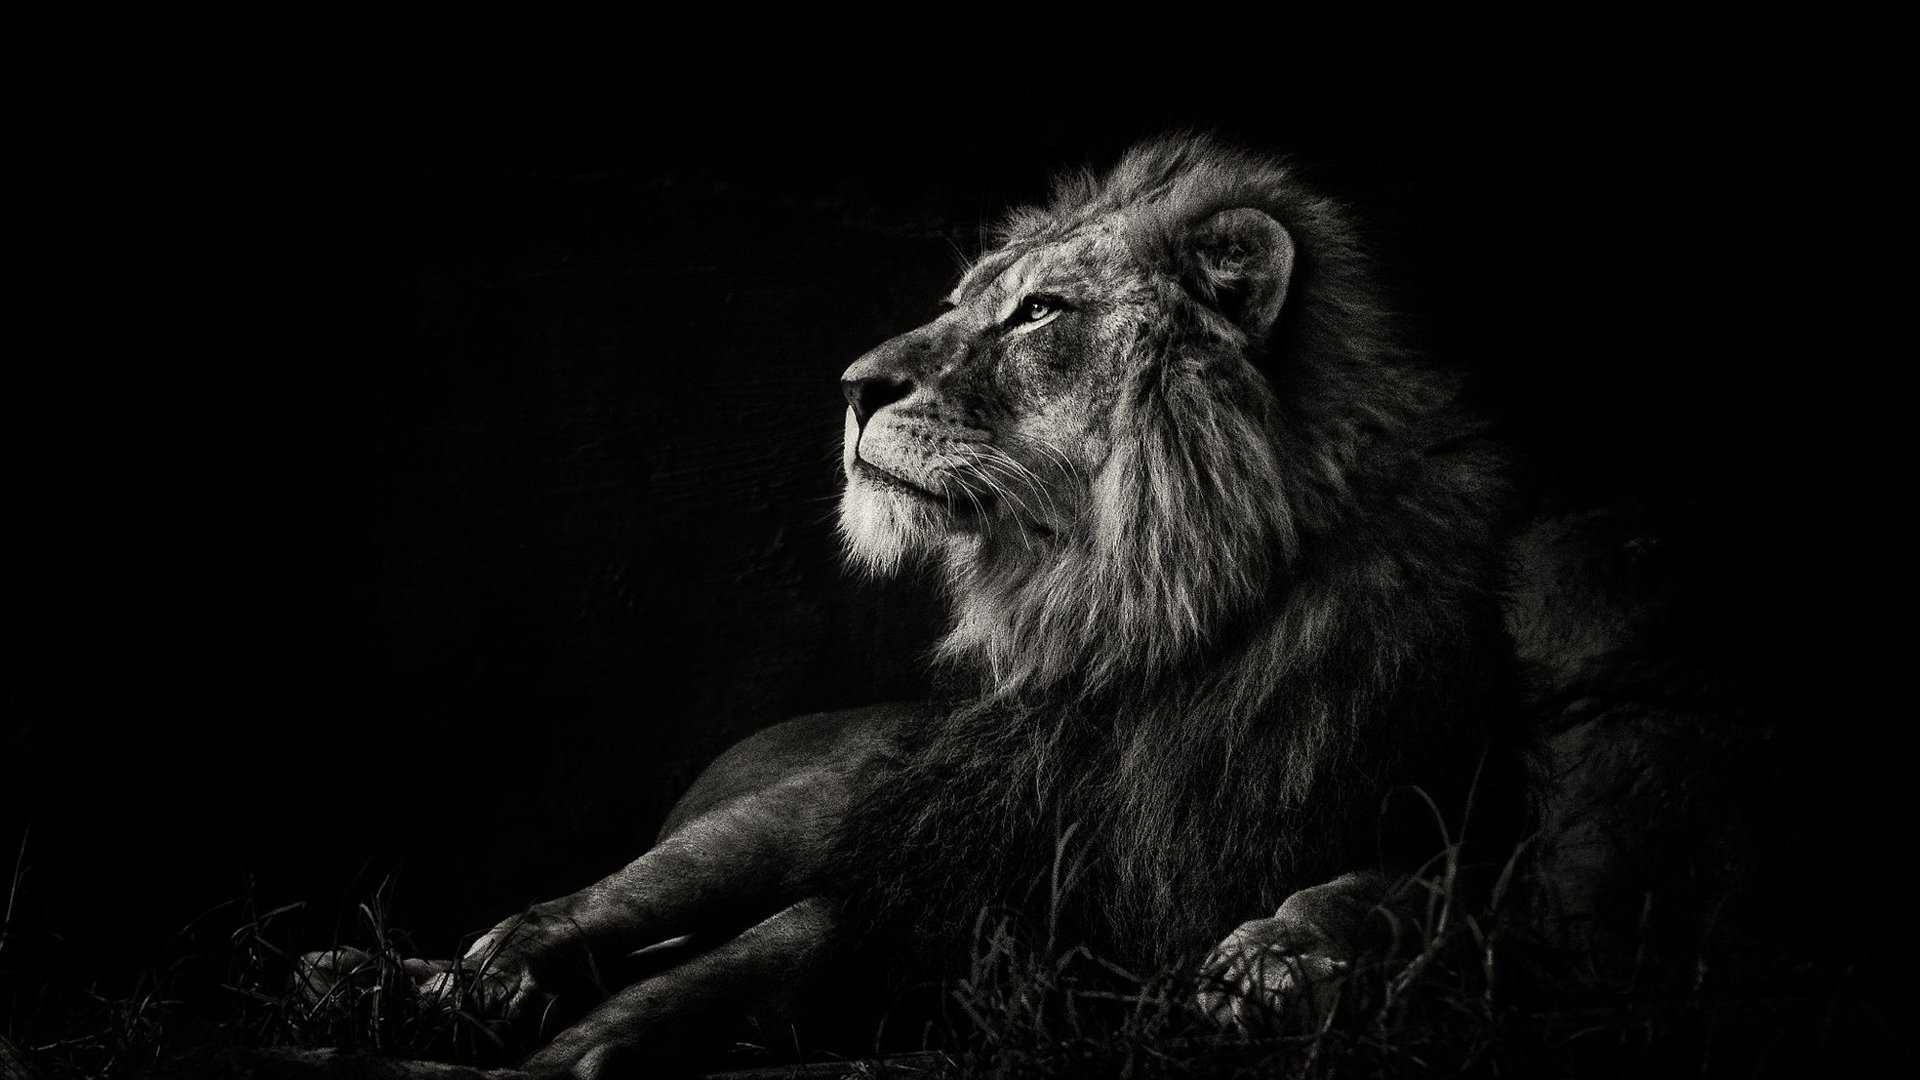 Lion HD Wallpaper | Background Image | 1920x1080 | ID ...